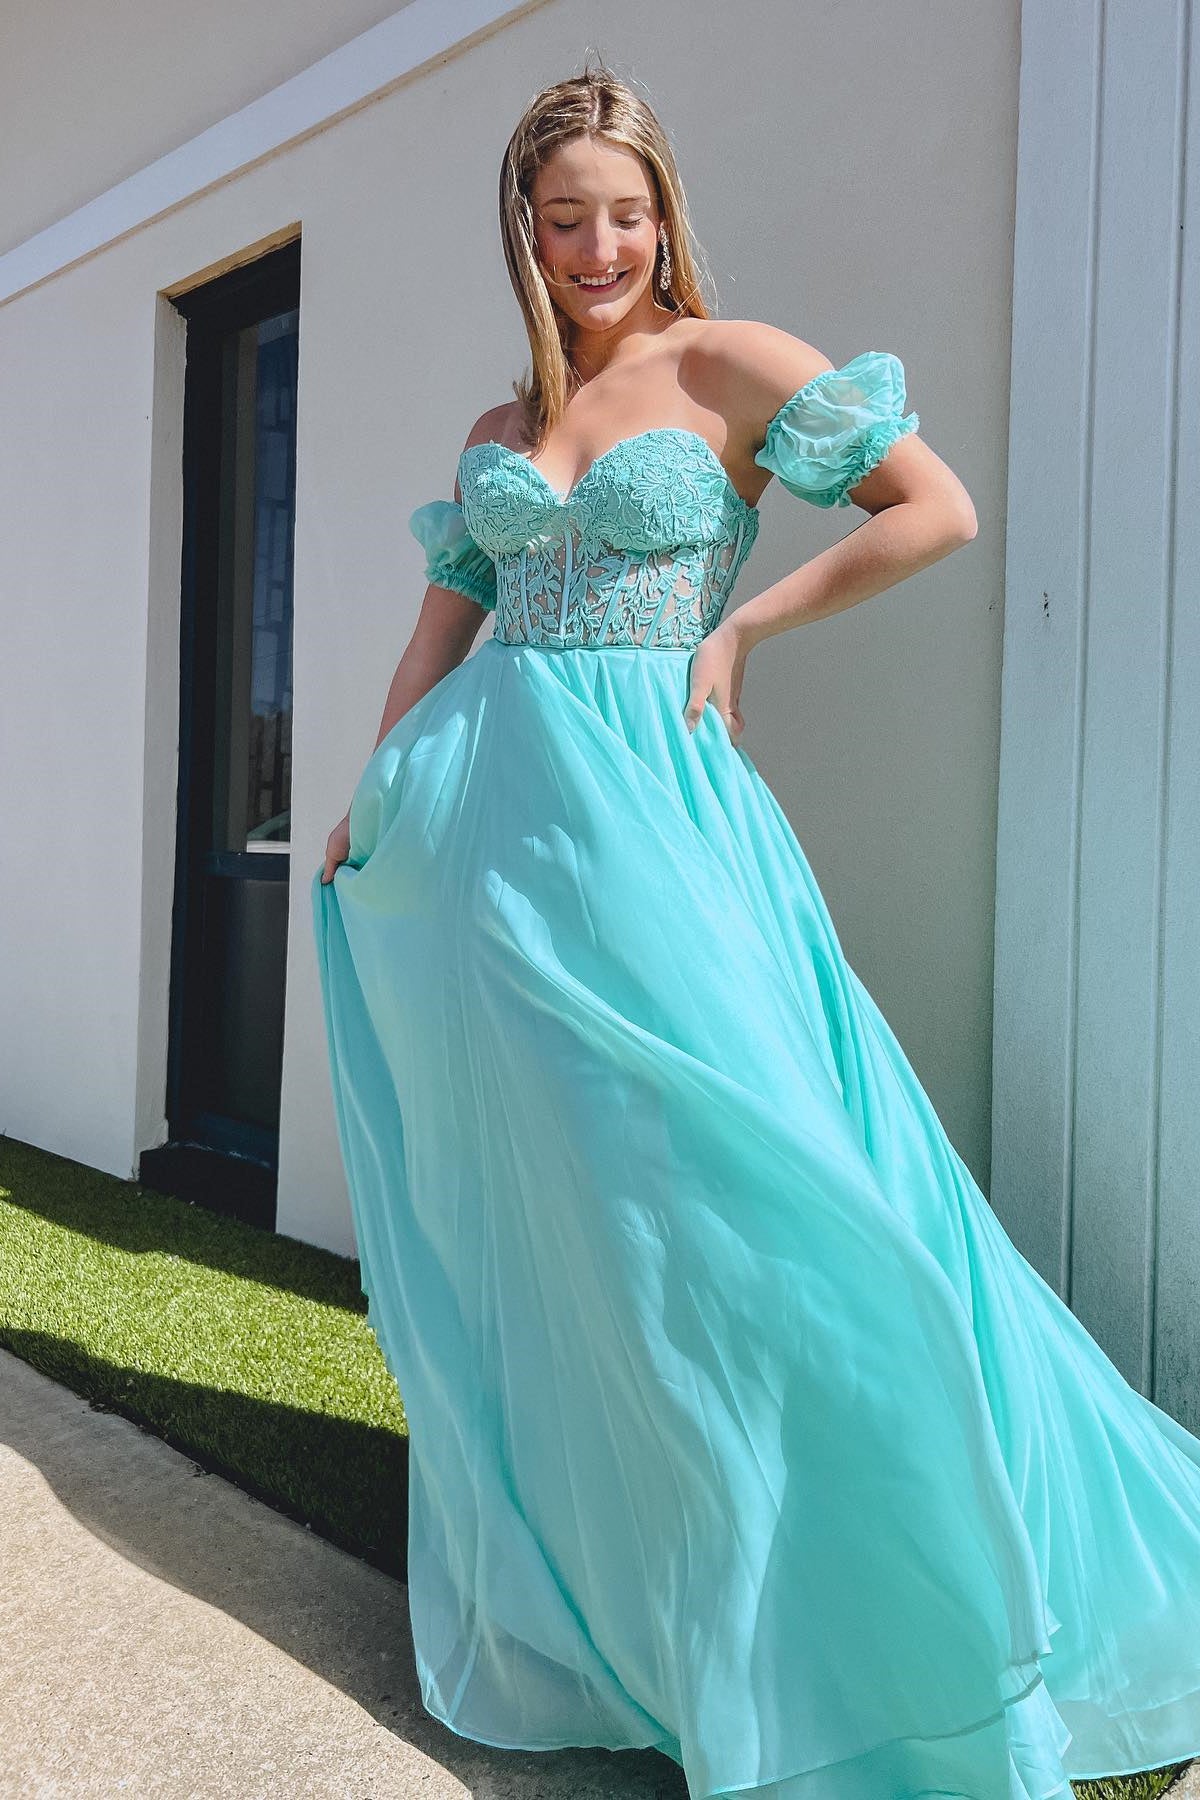 Aqua Blue Applique Strapless A-line Long Prom Gown with Puff Sleeves